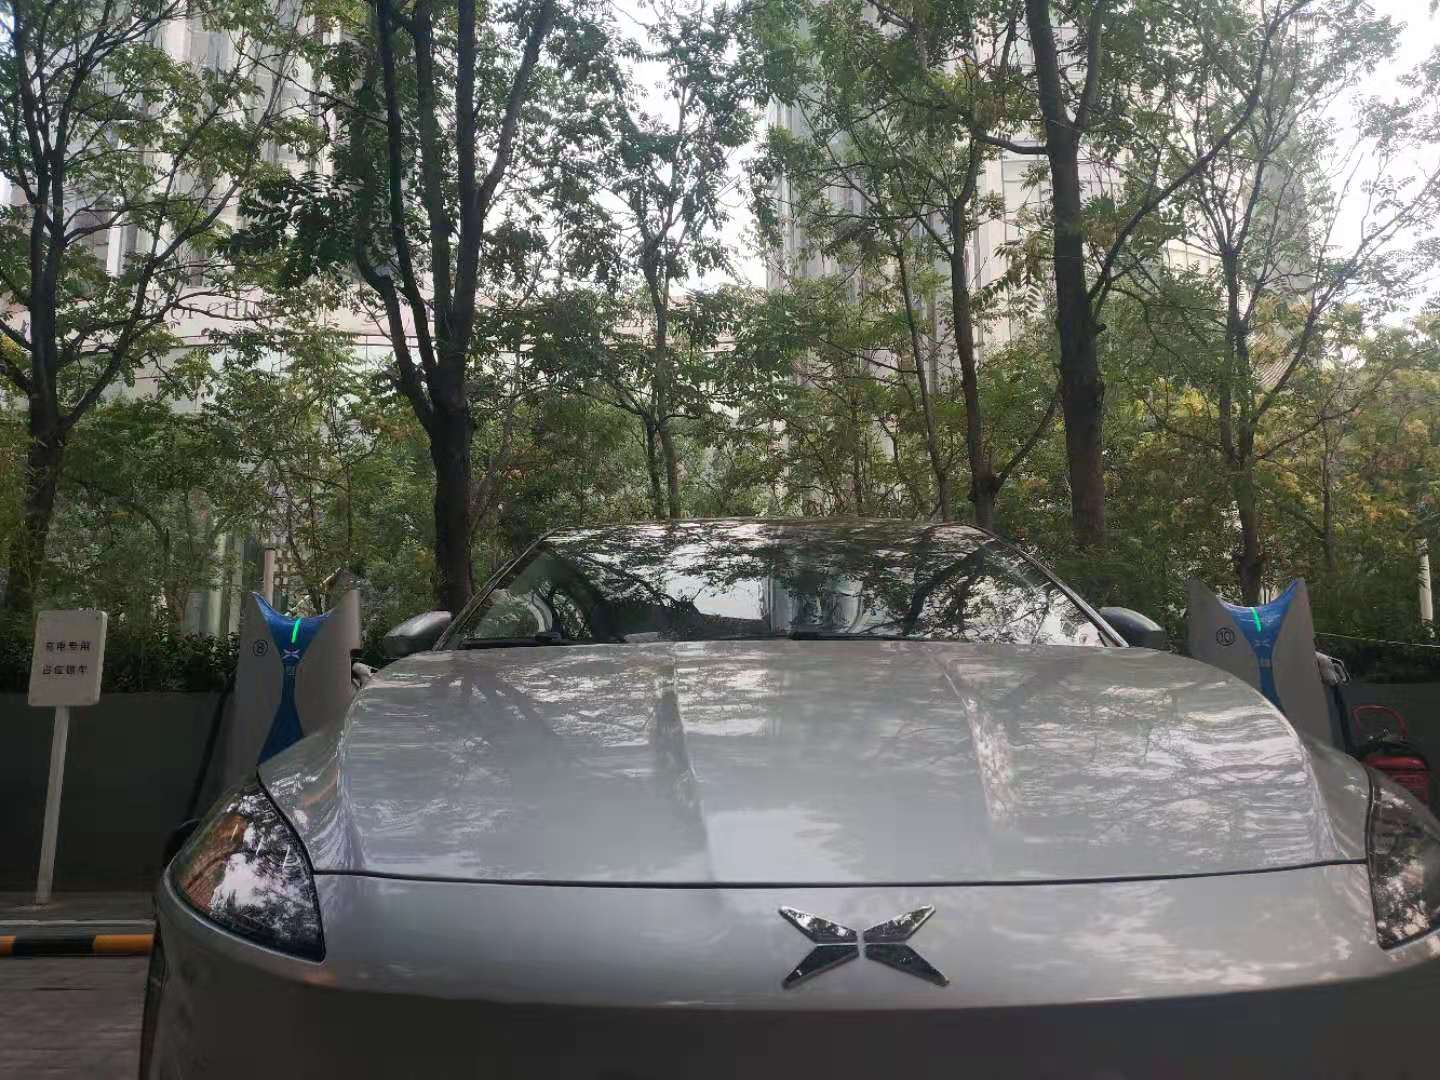 Exclusive | Chinese Tesla challenger Xpeng to file for US IPO seeking USD 500 million [Update]